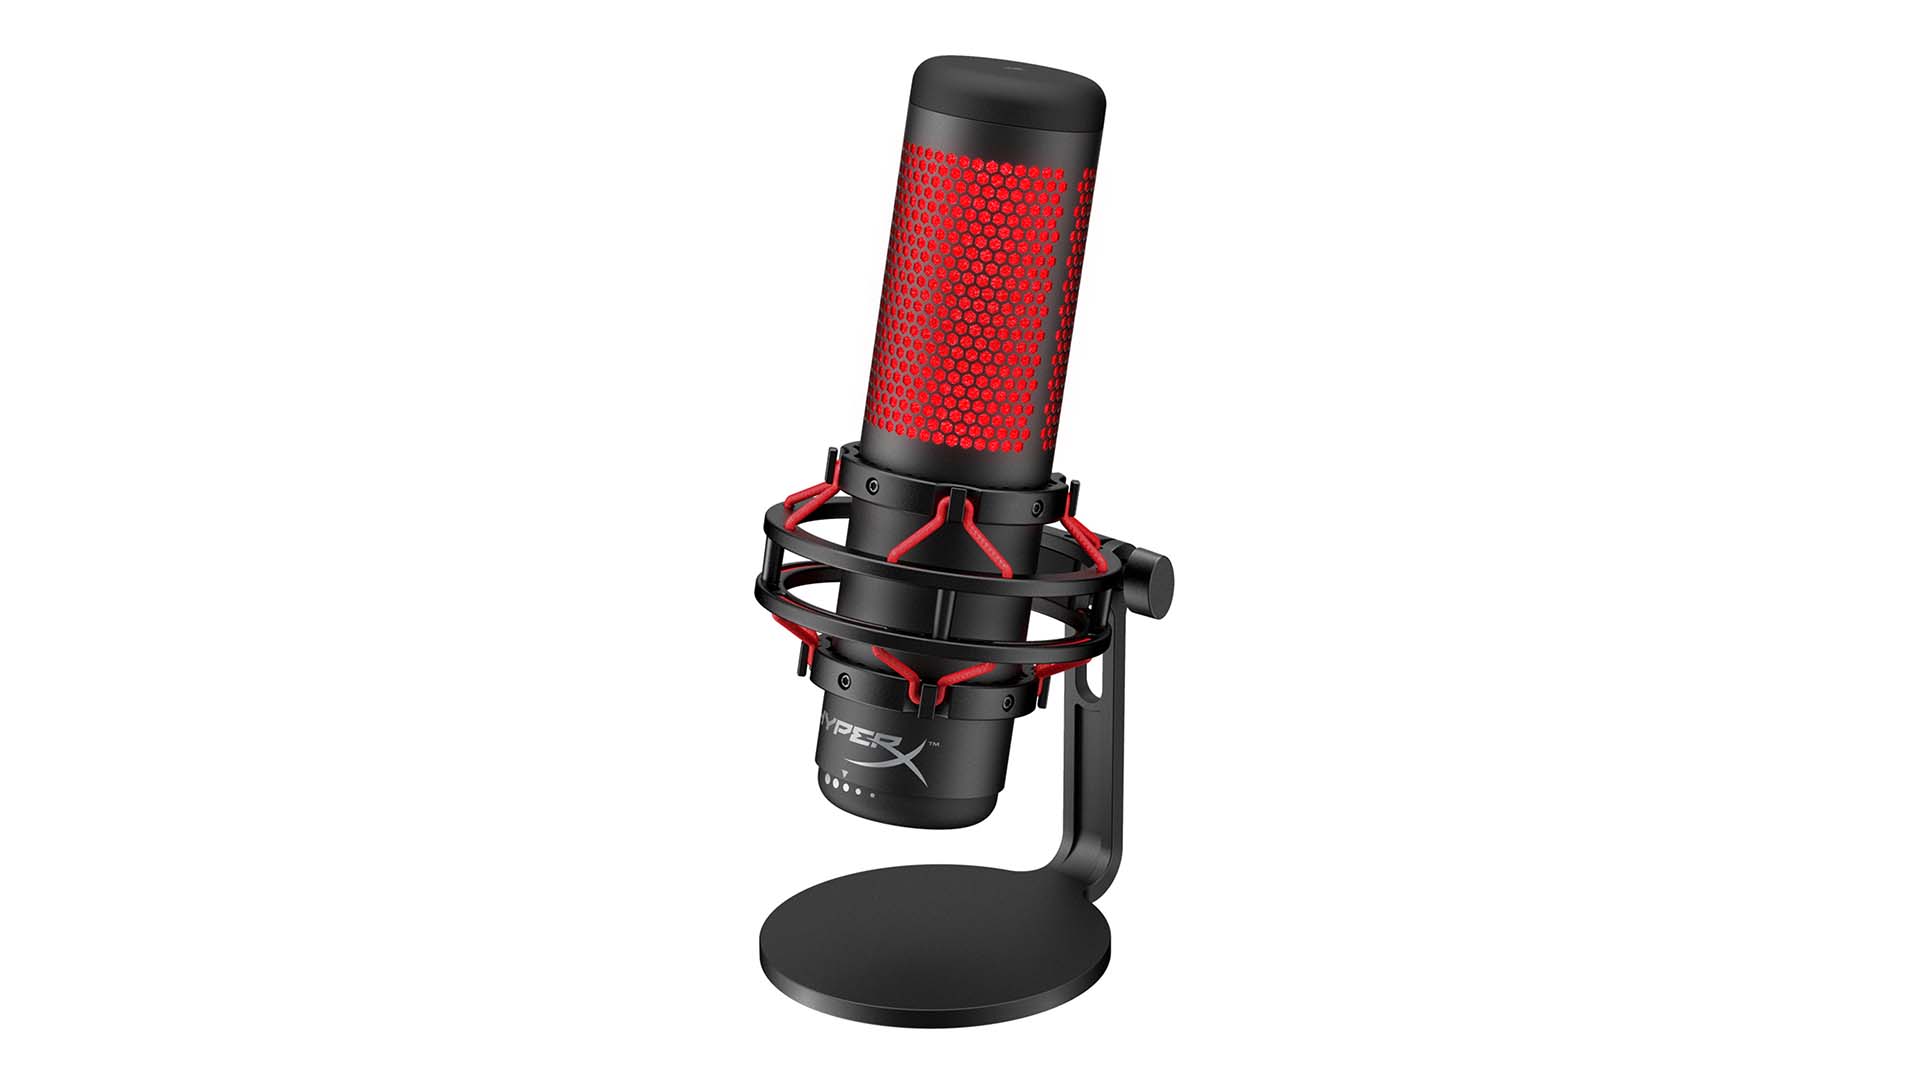 HyperX Quadcast microphone best gaming microphone 2021